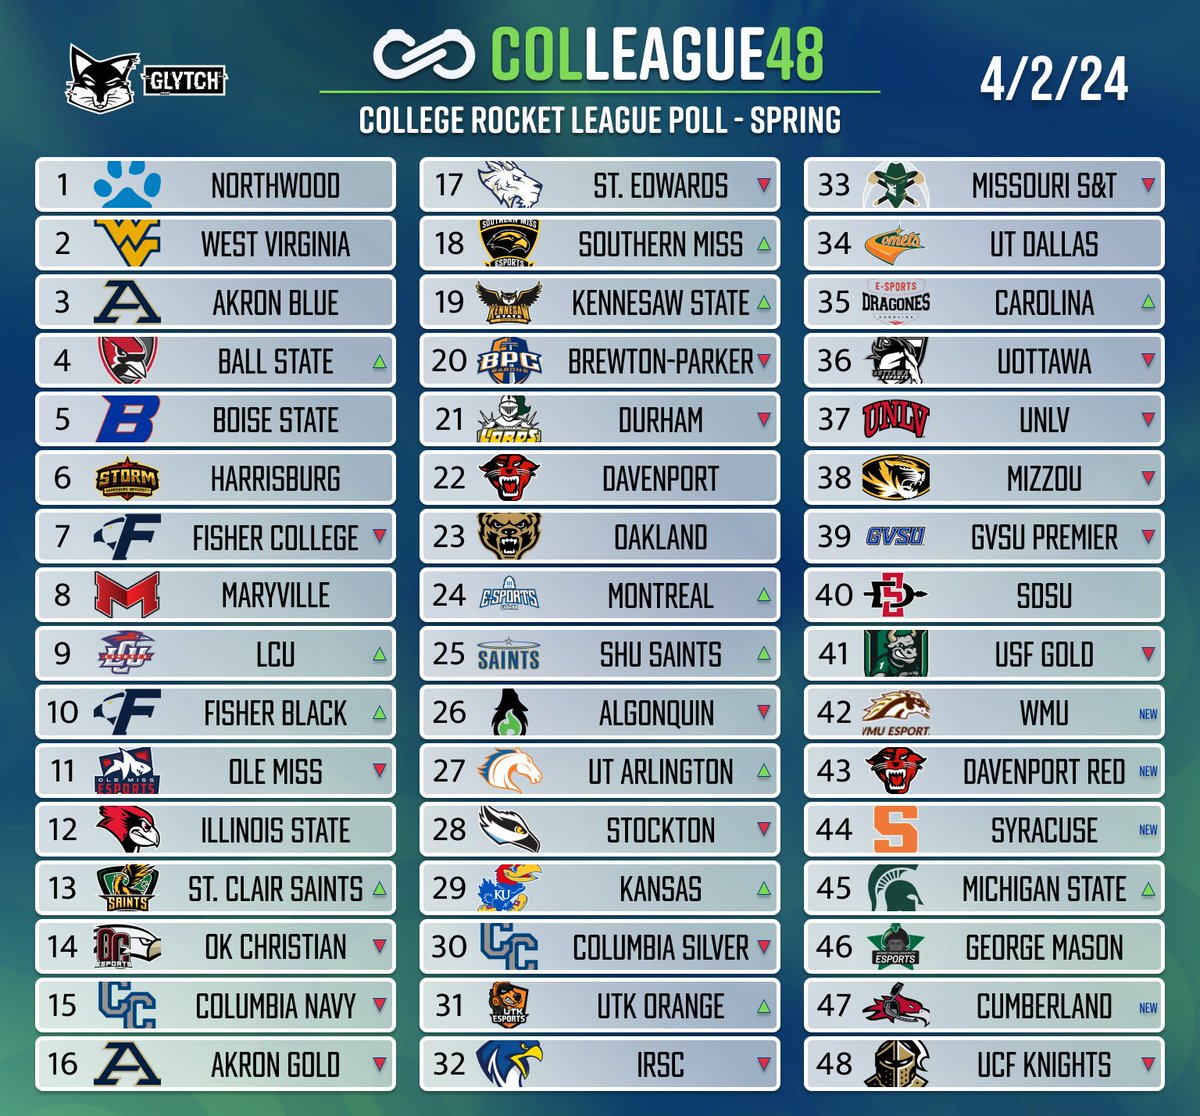 🔥 New College Rocket League Rankings 🔥 After an exciting #ColleagueMadness2024 and some other important tournament results across collegiate, here's our updated Colleague CRL Poll‼️ Lots of movement in this one, and shoutout some new teams making a name for themselves 👀